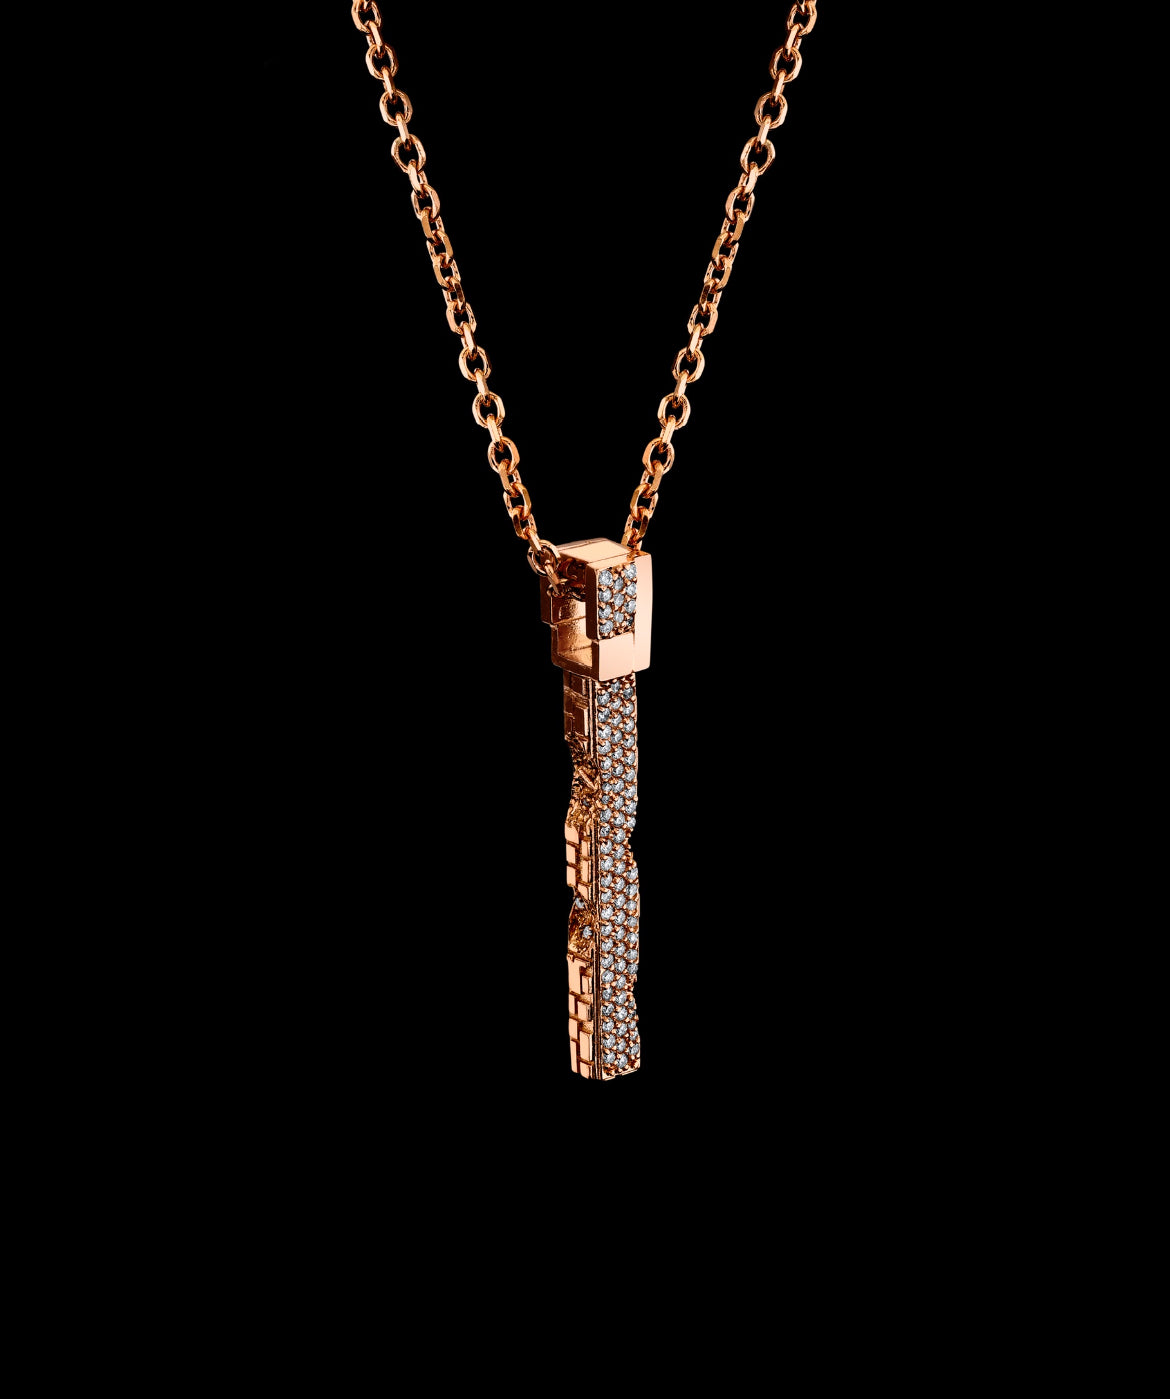 Eroded Architecture 18k Rose Gold Large Bar Necklace with pavé set round brilliant diamonds.  Edition of 30.